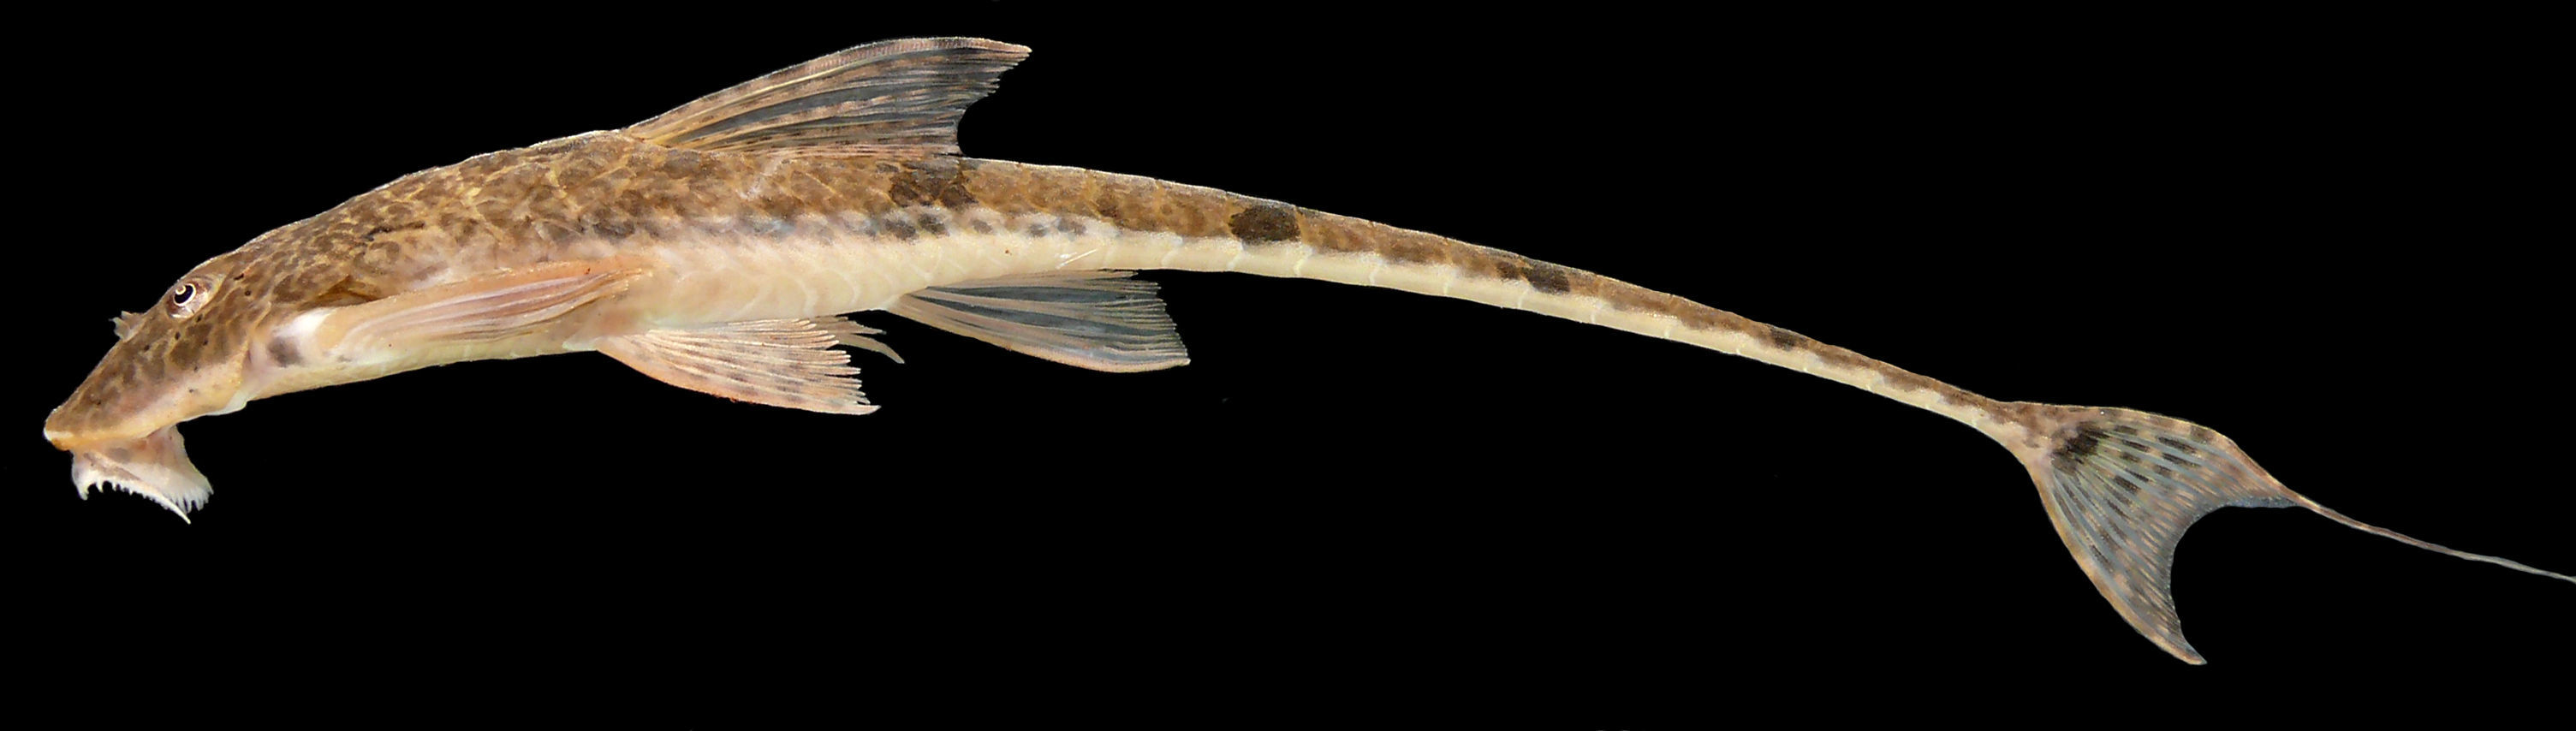 Image of Whiptailed loricaria